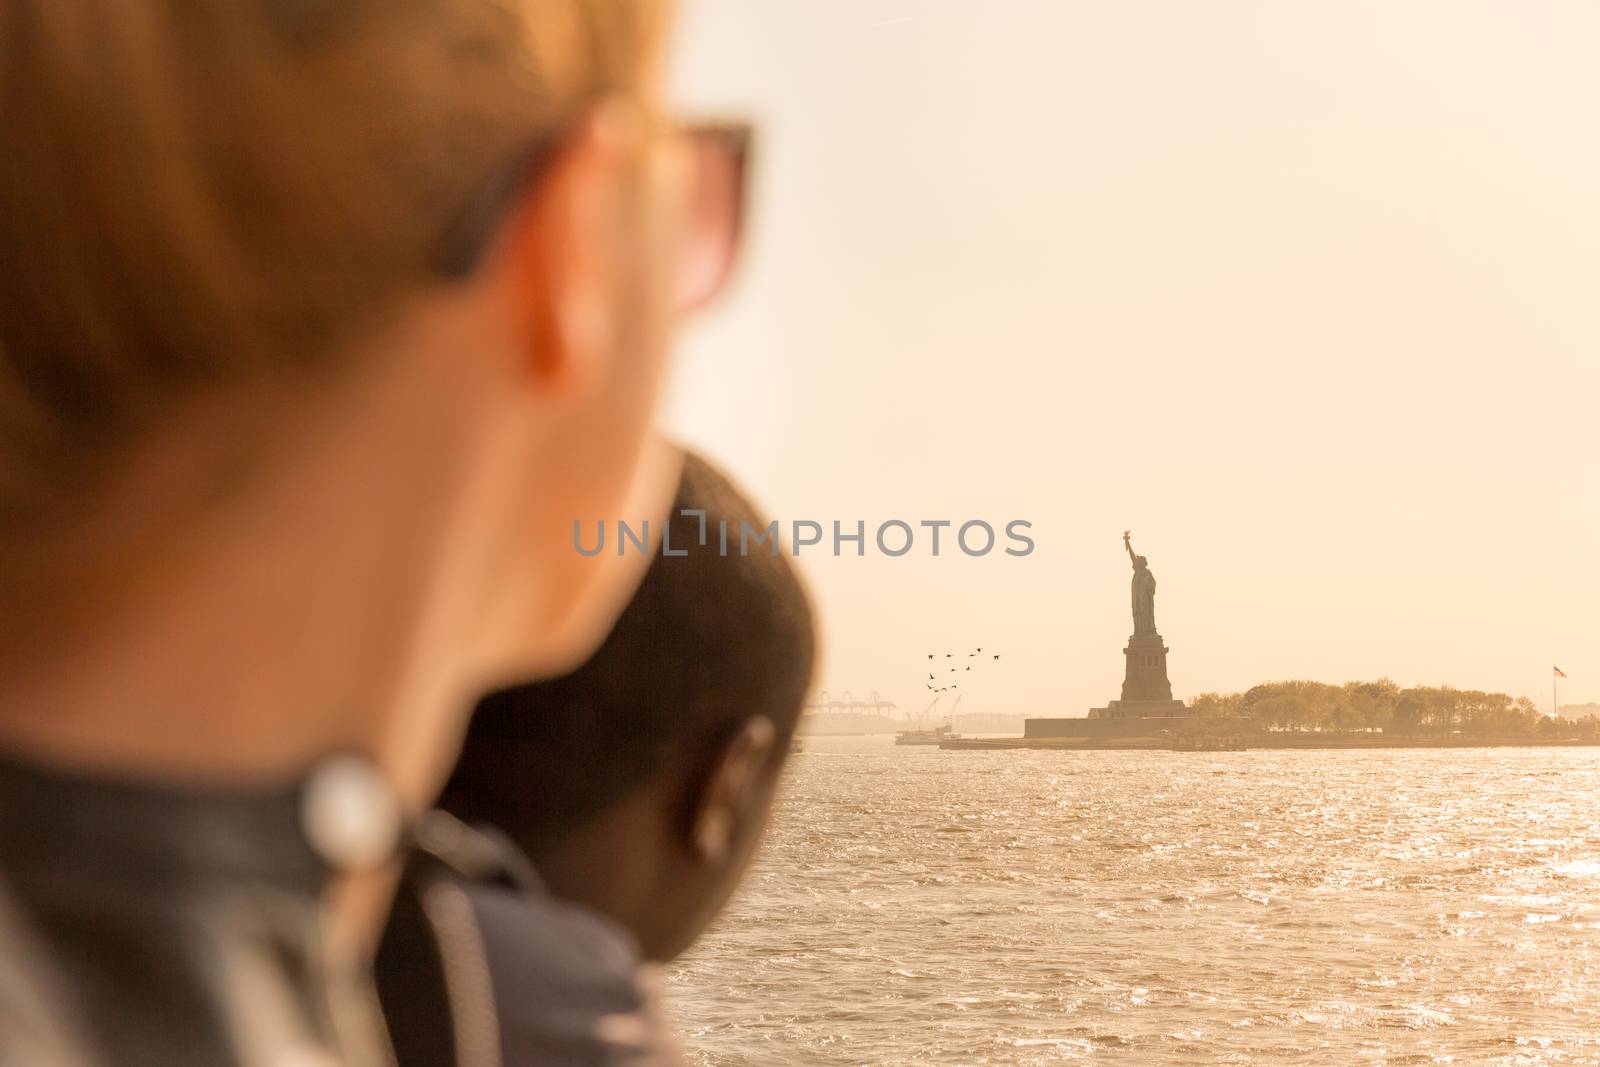 Tourists looking at Statue of Liberty silhouette in sunset from the staten island ferry, New York City, USA by kasto